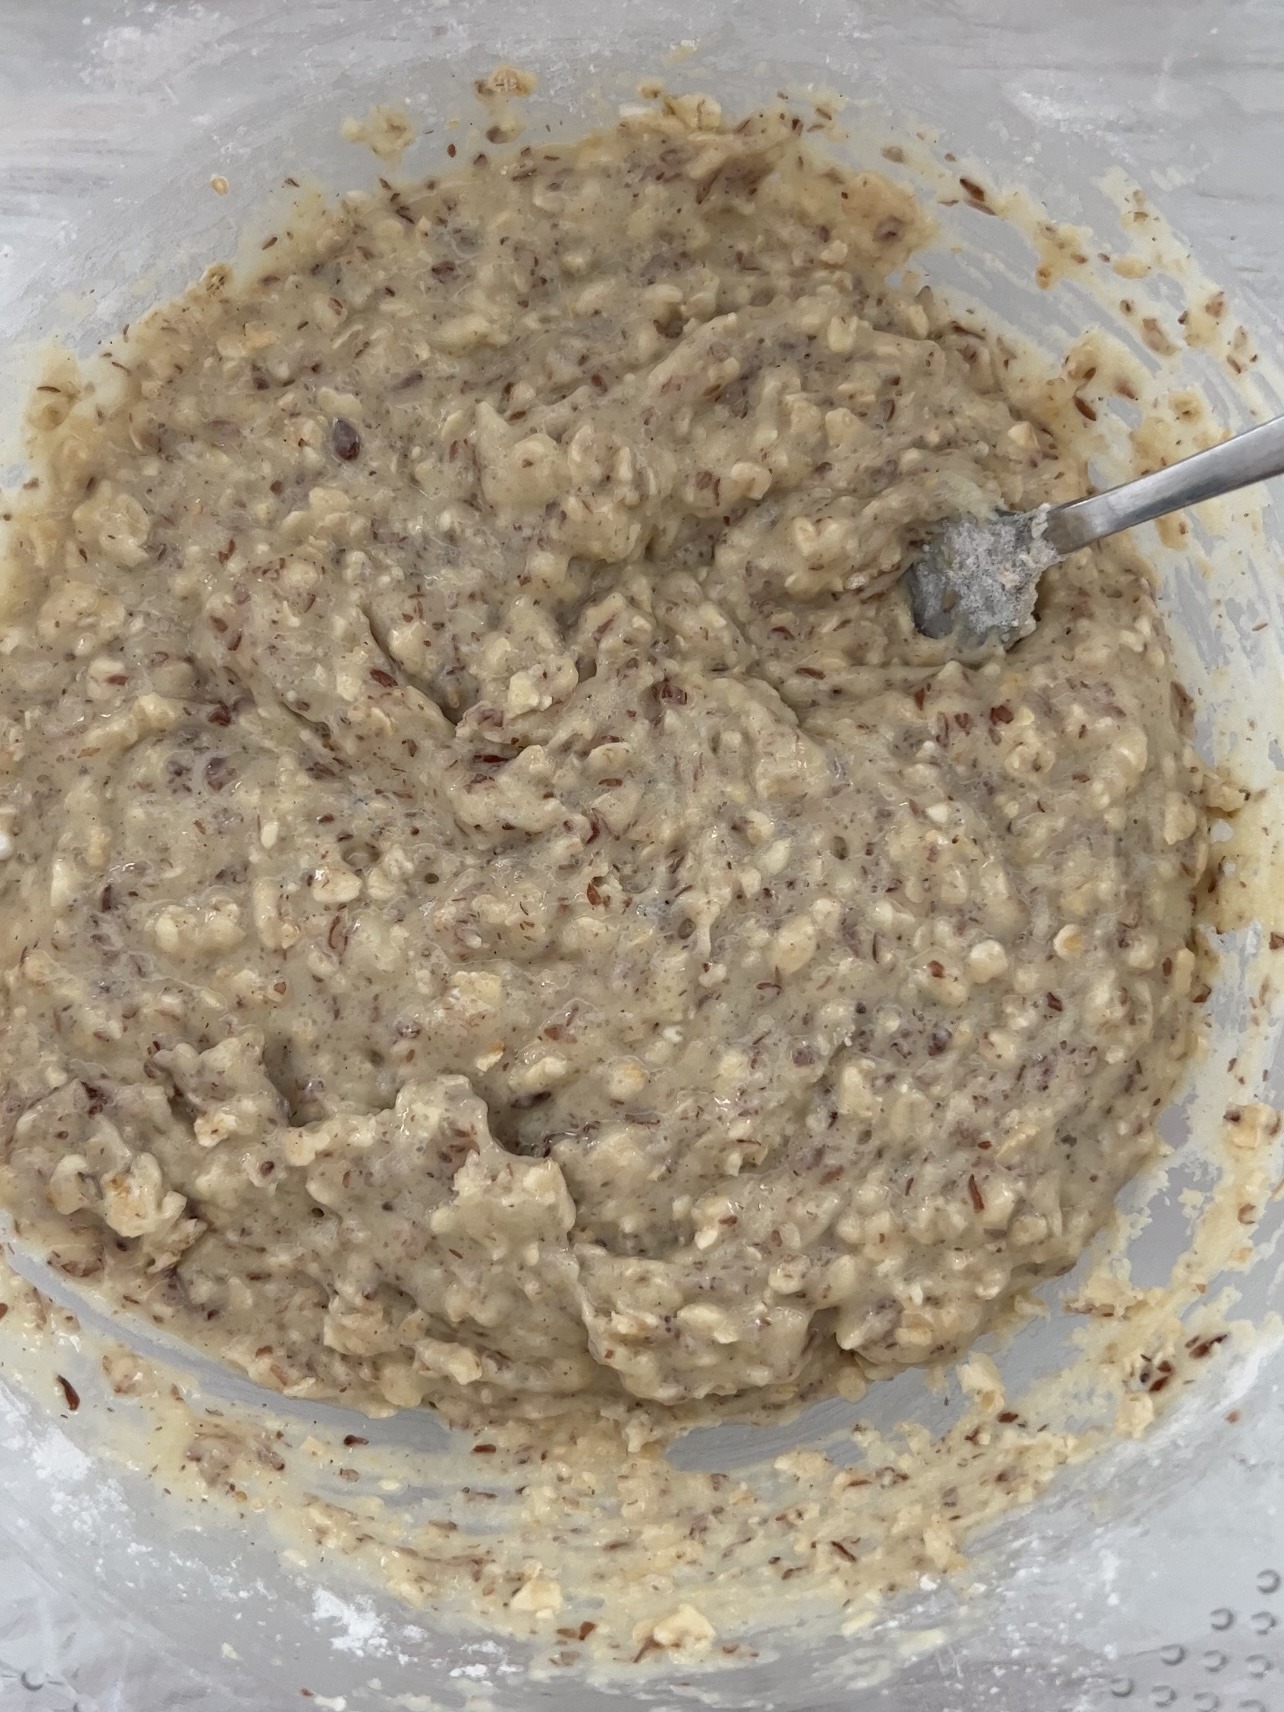 how to make sugar cookie oatmeal bars - Step 2: In a medium bowl, mix the melted vegan butter, almond or oat milk, sugar, vanilla, salt, baking powder, and flax eggs together. Add the flour and oats and mix until a thick batter forms.